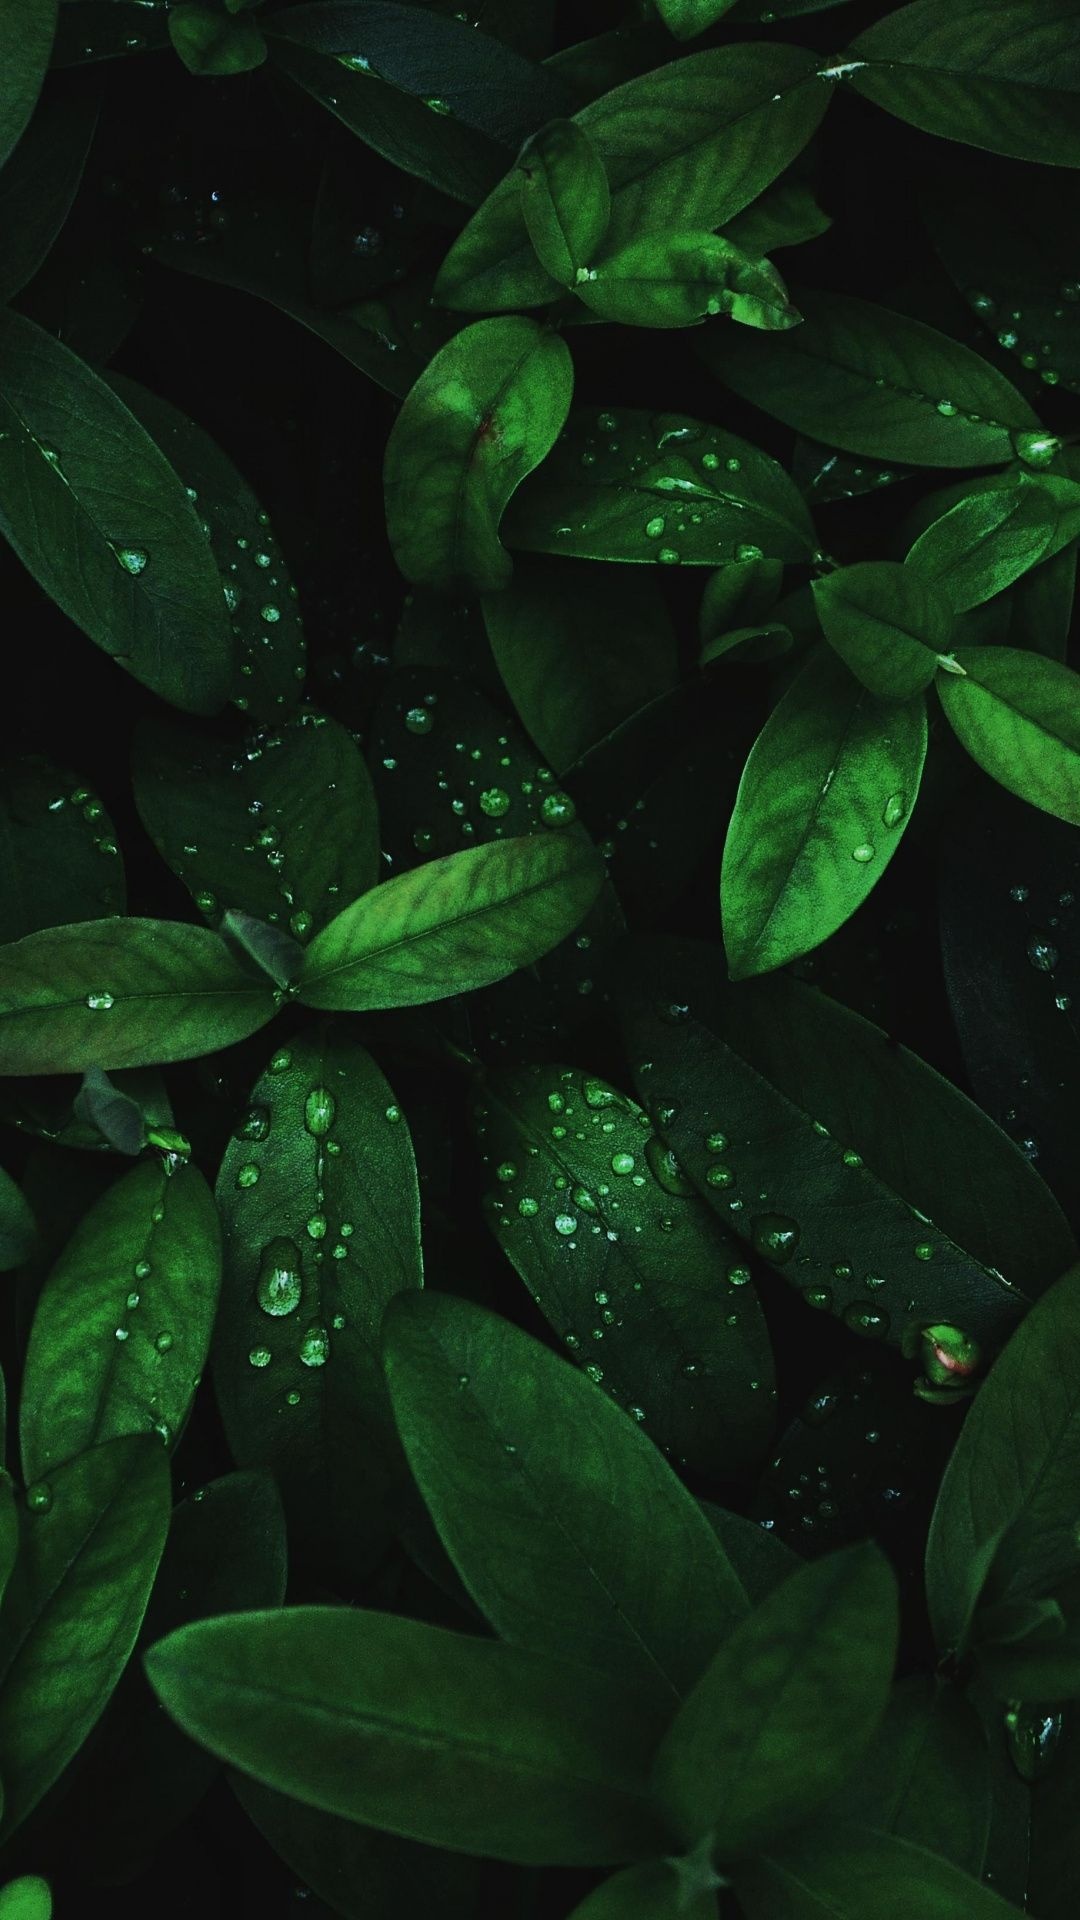 Green Leaf: The jungle circle of vegetation, A fern tropical forest, Amazing nature, Leaves covered with raindrops. 1080x1920 Full HD Background.